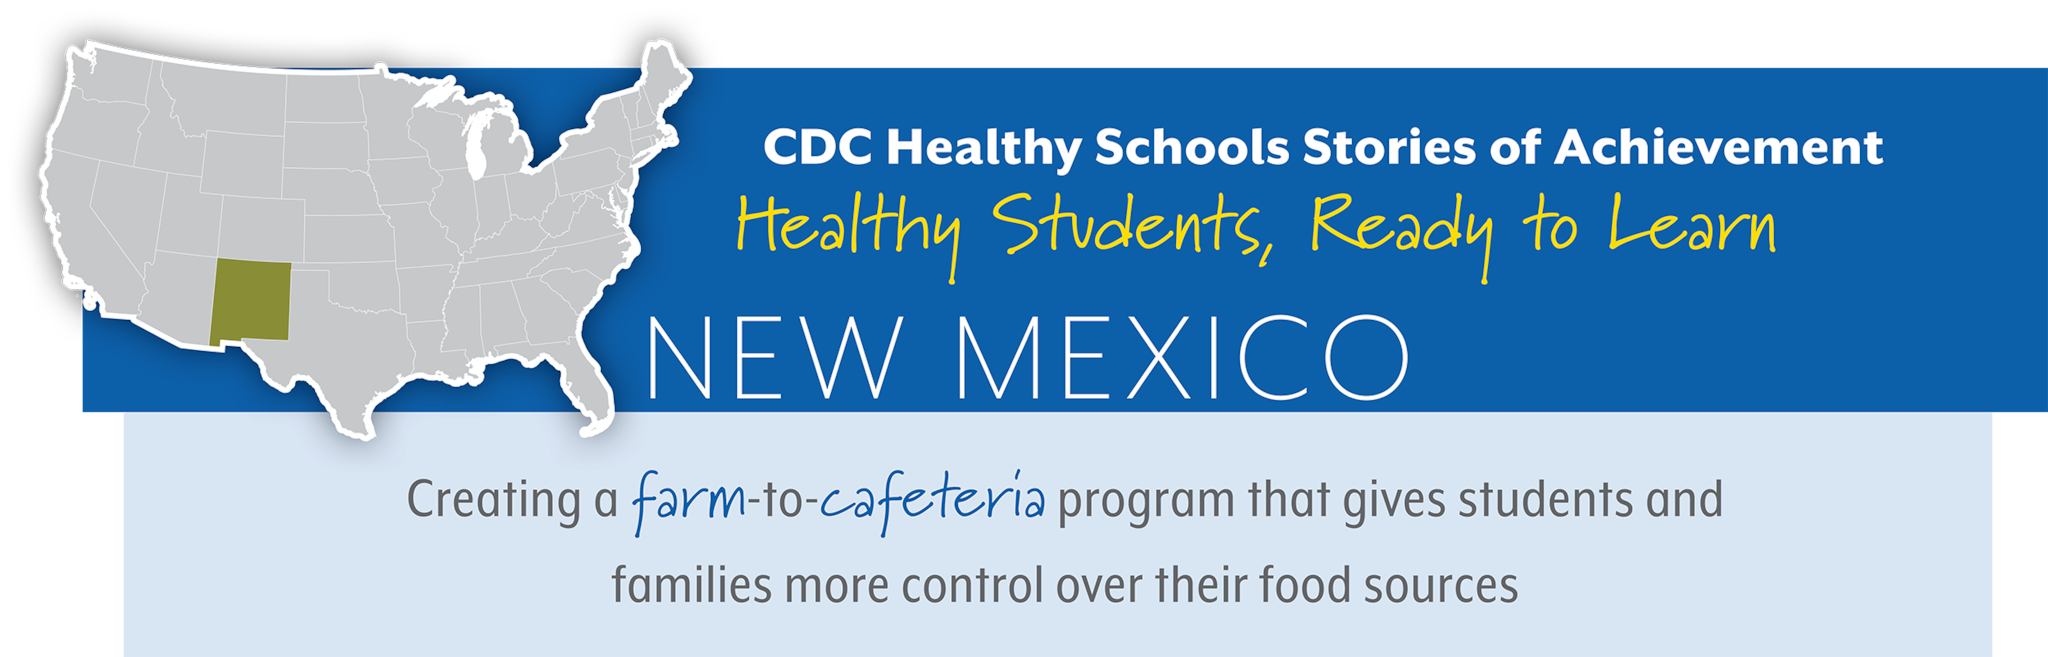 CDC Healthy Schools Stories of Achievement  Healthy Students, Ready to Learn  NEW MEXICO  Creating a farm-to-cafeteria program that gives students and  families more control over their food sources